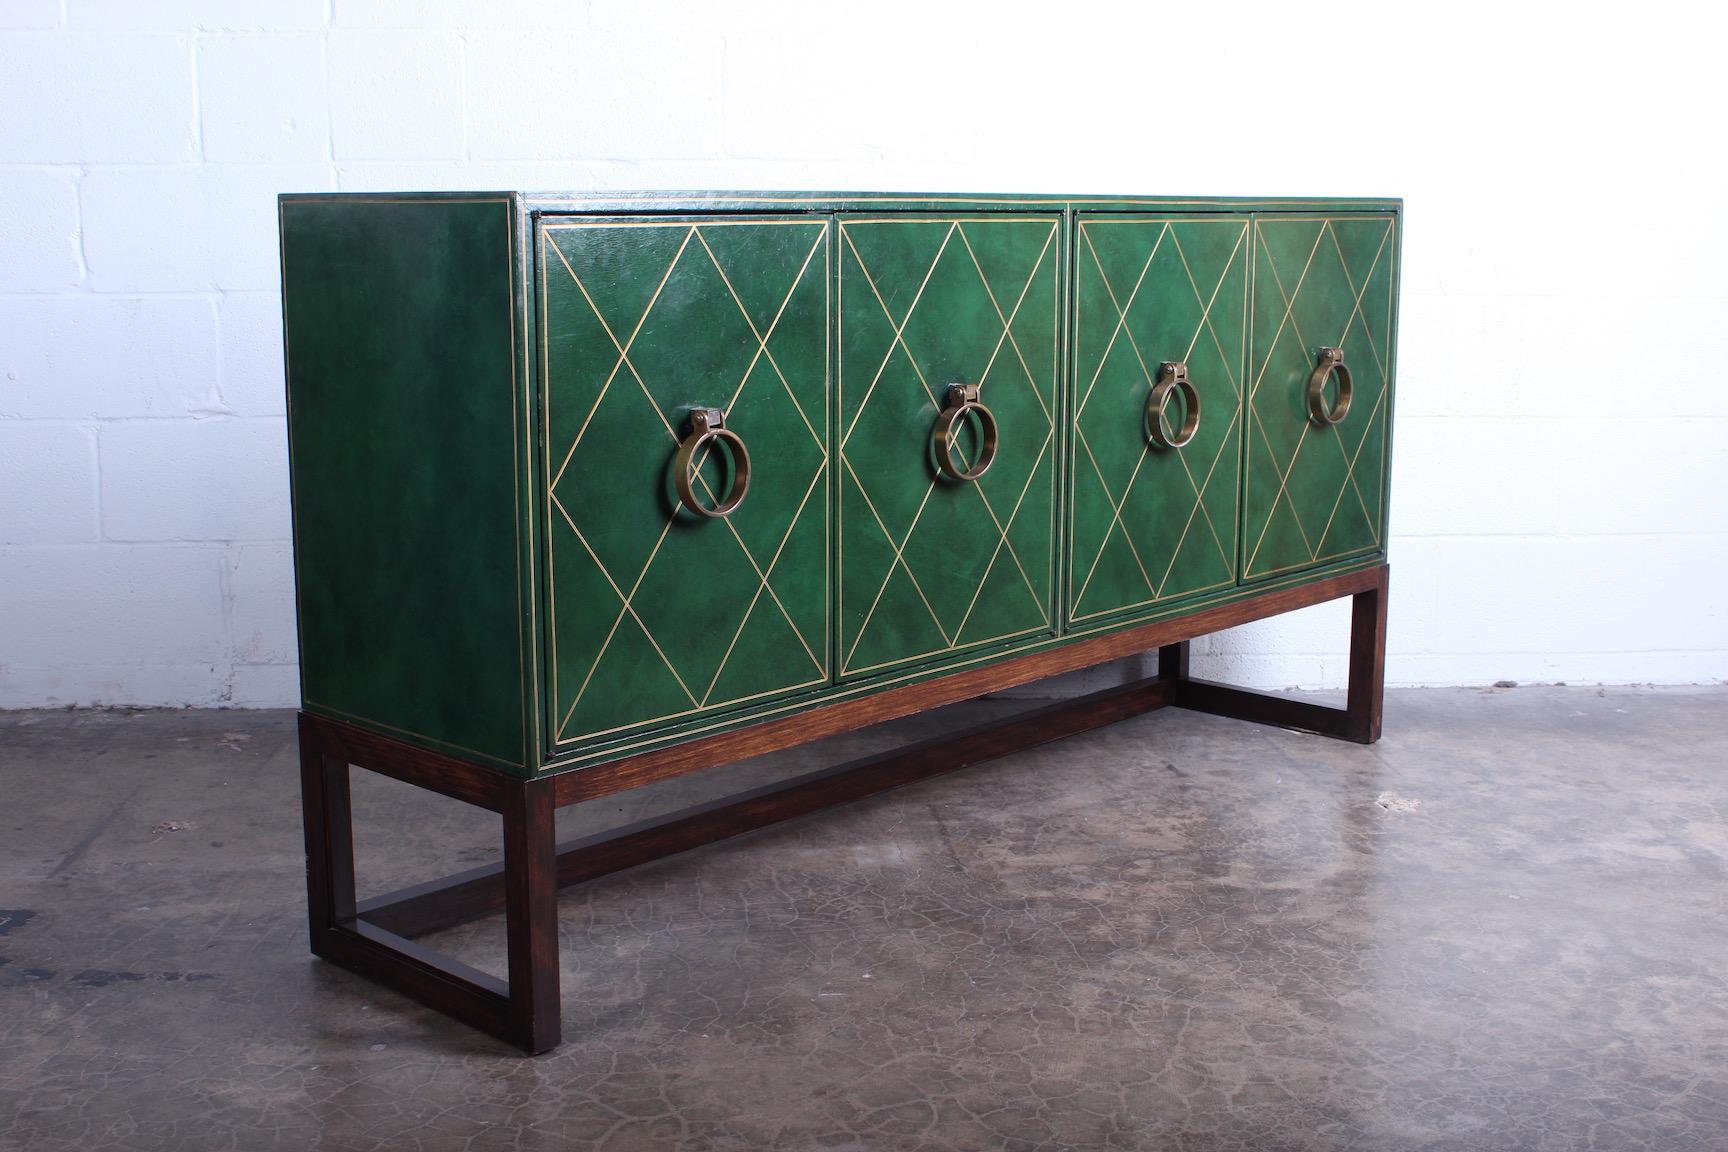 A leather clad cabinet with bronze hardware and mahogany base. Designed by Tommi Parzinger for Parzinger originals.